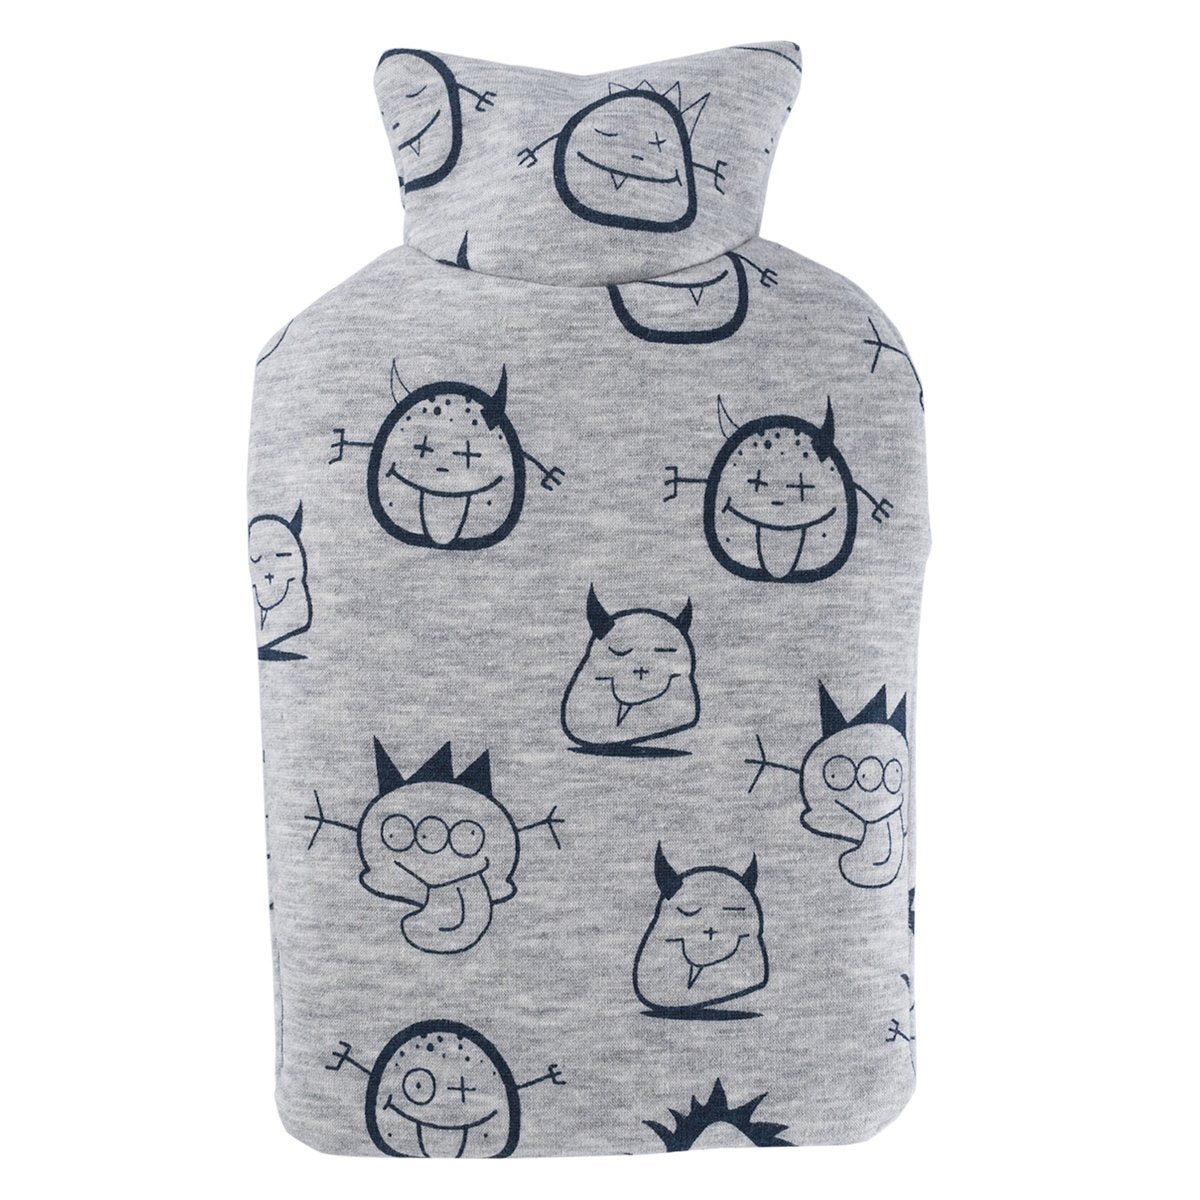 Kids Eco Hot Water Bottle Junior Comfort with Cover, Laughing Spirits